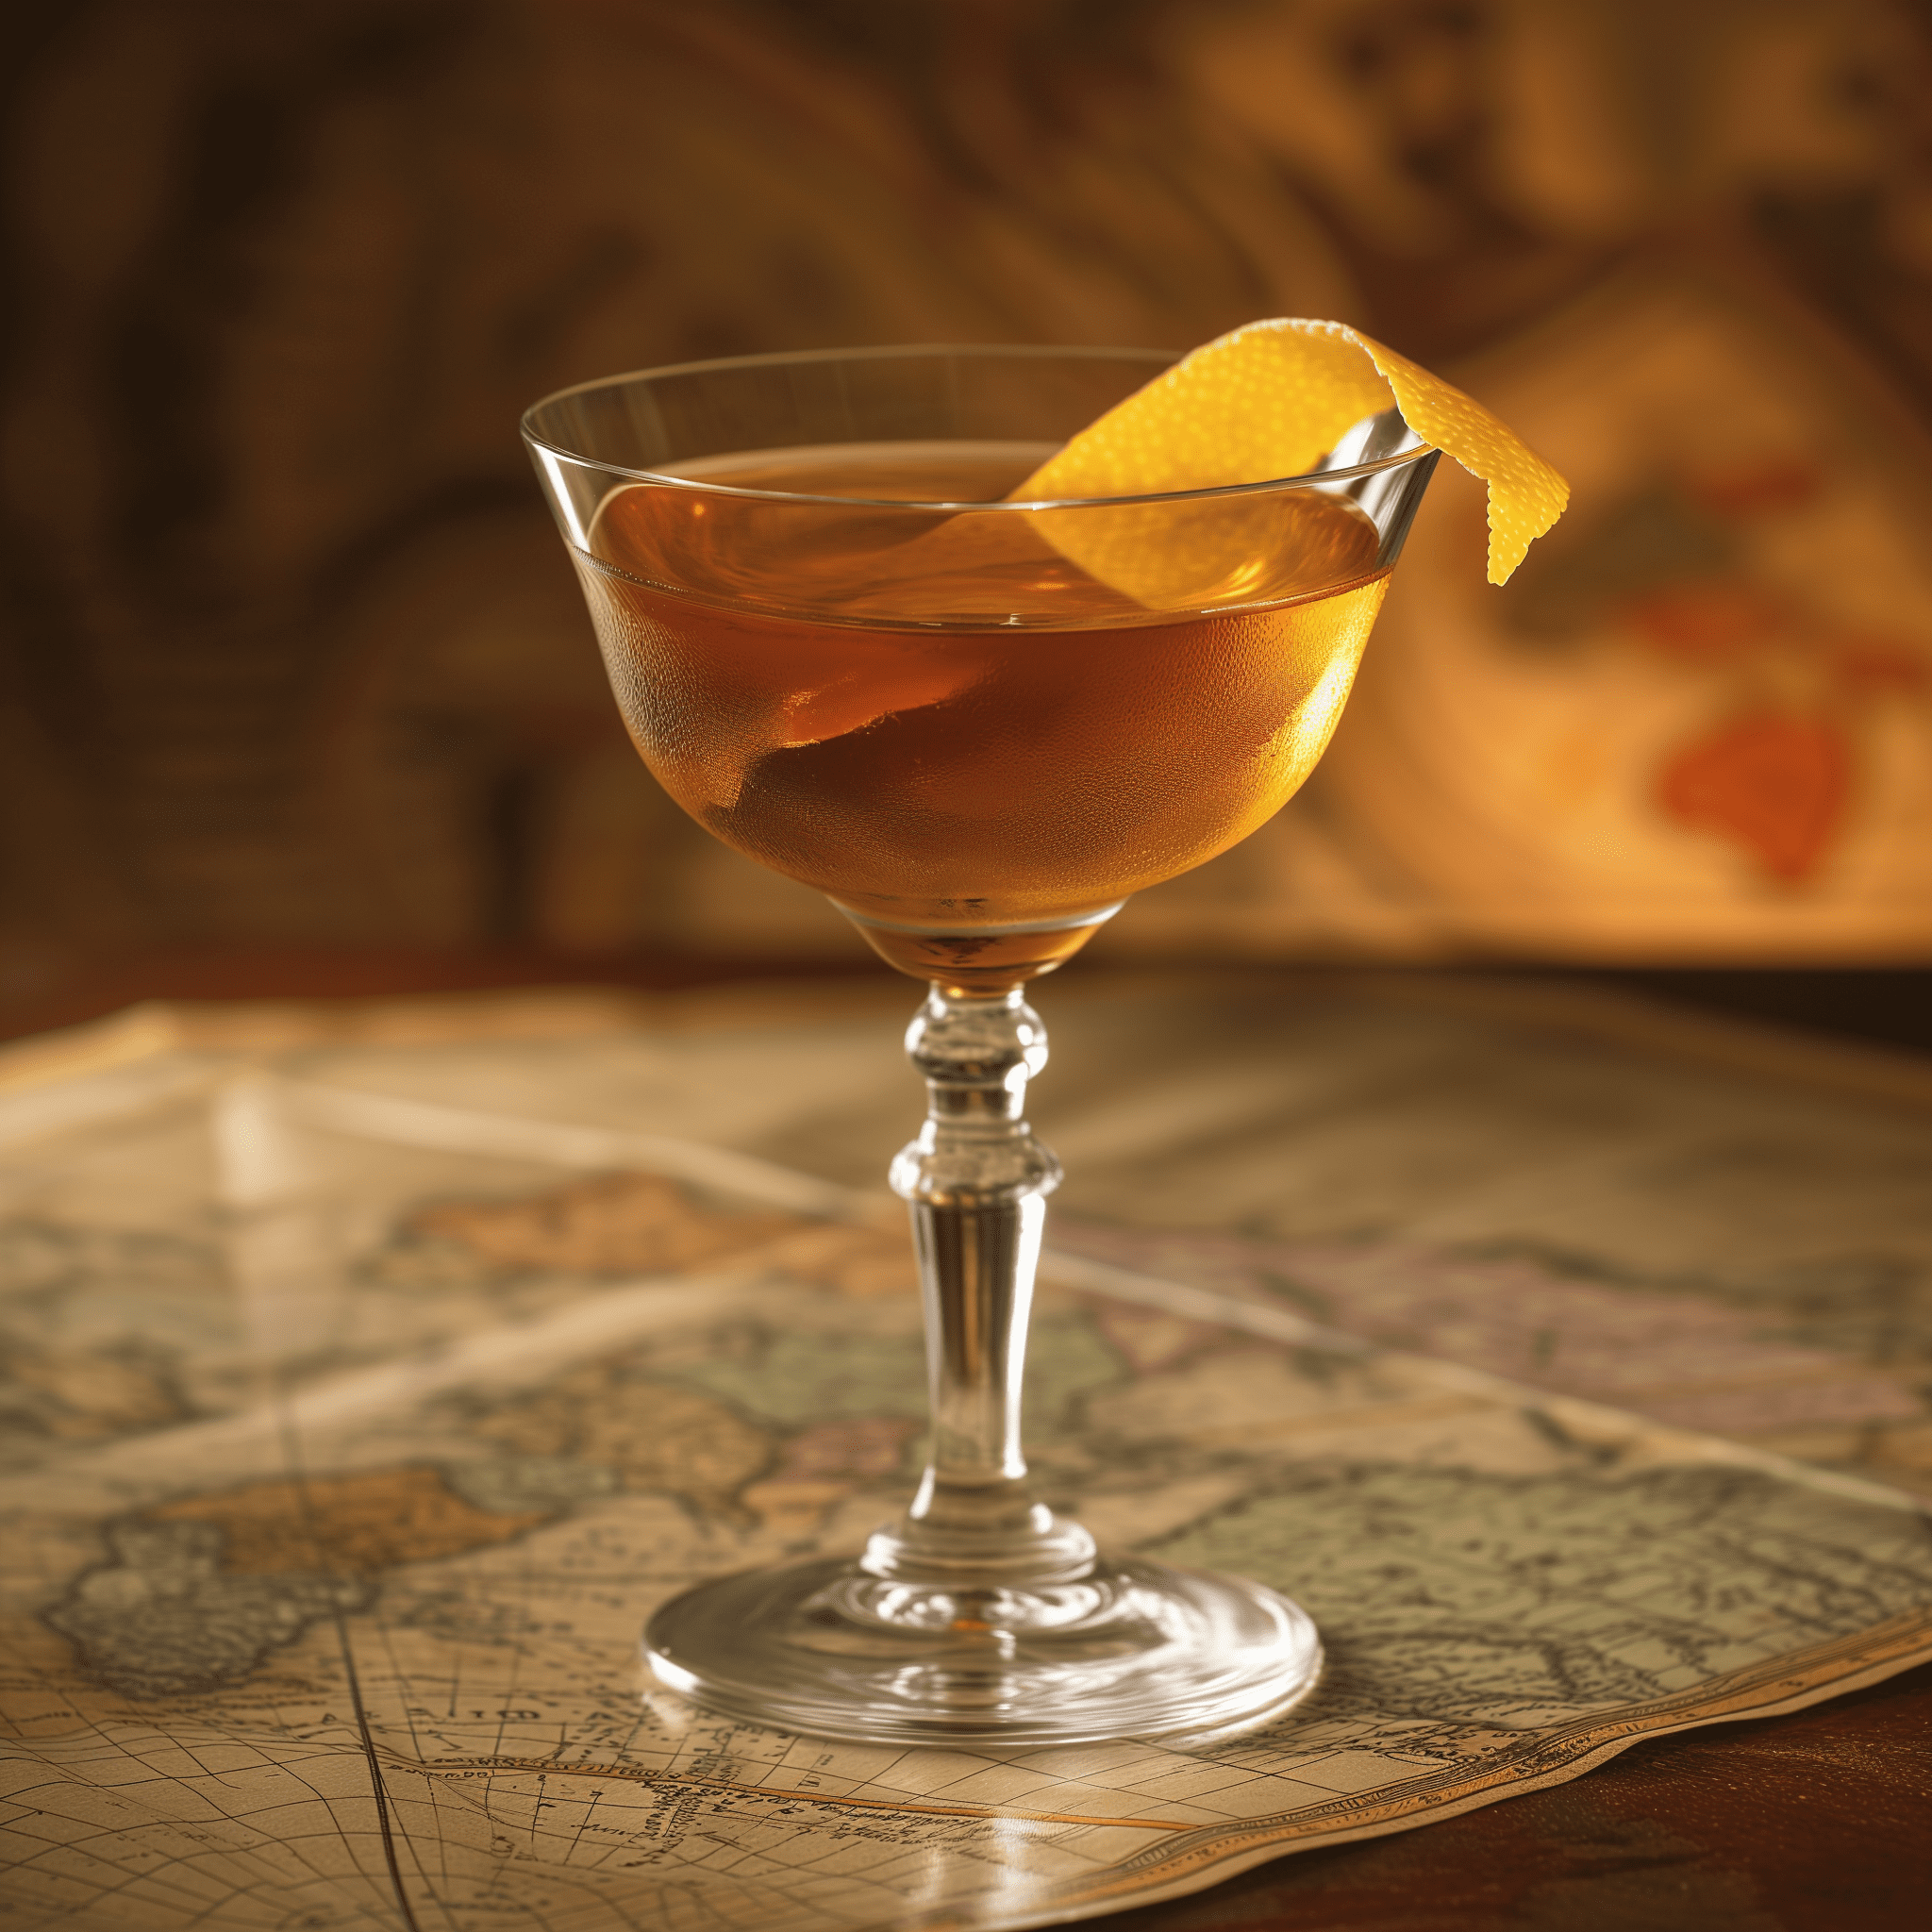 Lost Plane Cocktail Recipe - The Lost Plane offers a harmonious balance of sweet and bitter, with the dark rum providing a rich, caramel-like undertone. The Aperol adds a touch of herbal bitterness, while the Montenegro Amaro brings a complex, botanical profile. The fresh lemon juice cuts through with a bright acidity, making the cocktail both refreshing and robust.